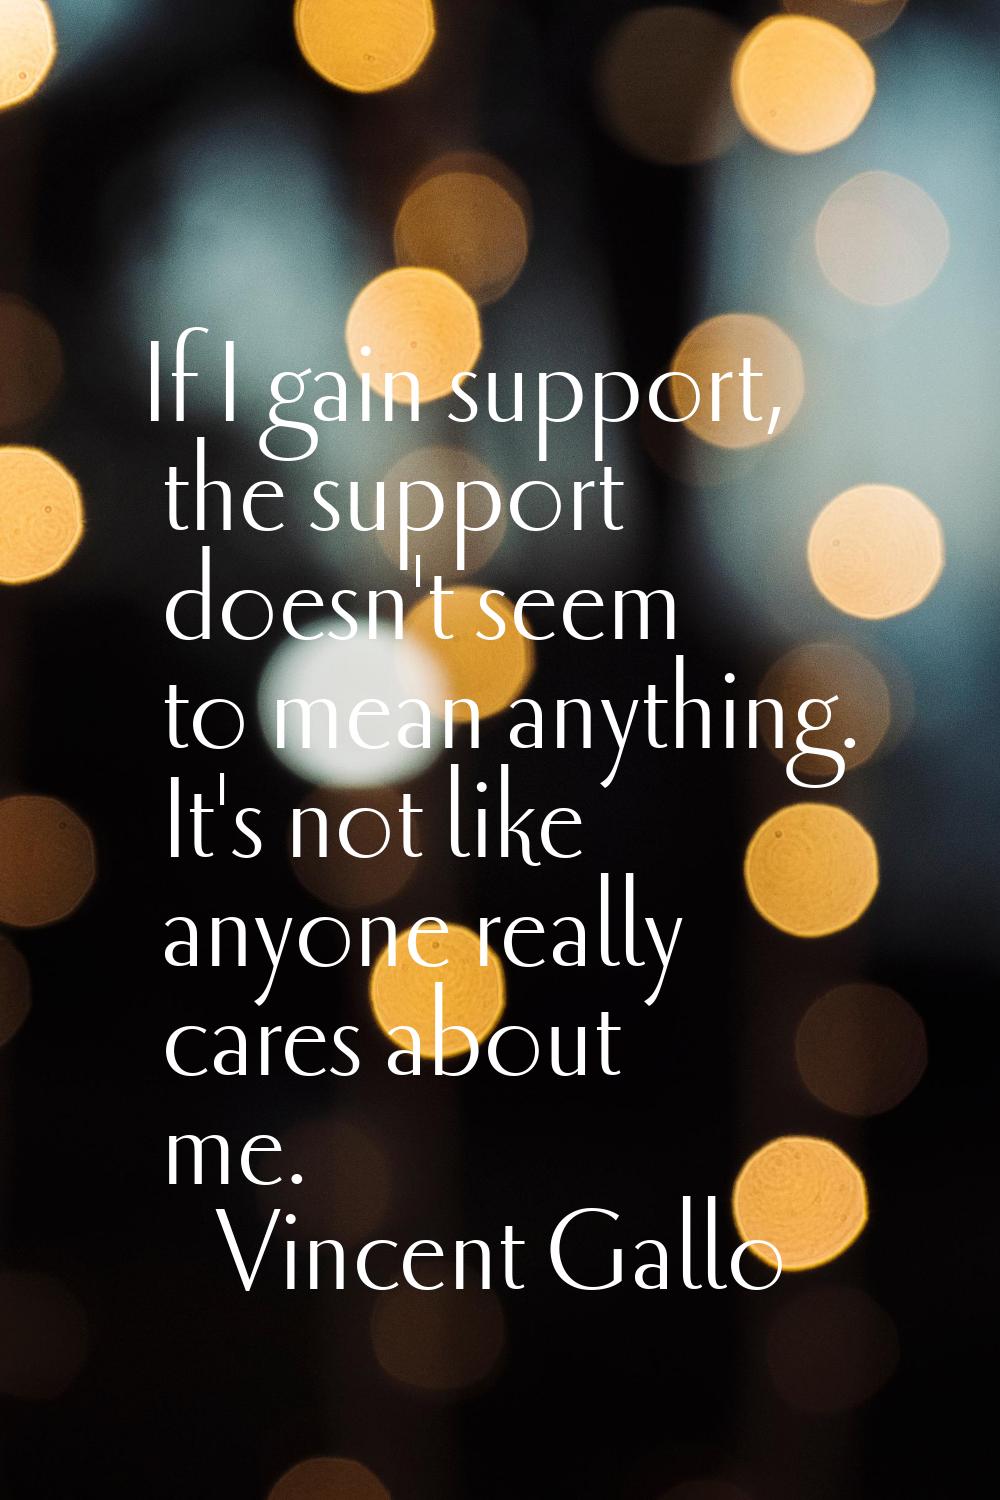 If I gain support, the support doesn't seem to mean anything. It's not like anyone really cares abo